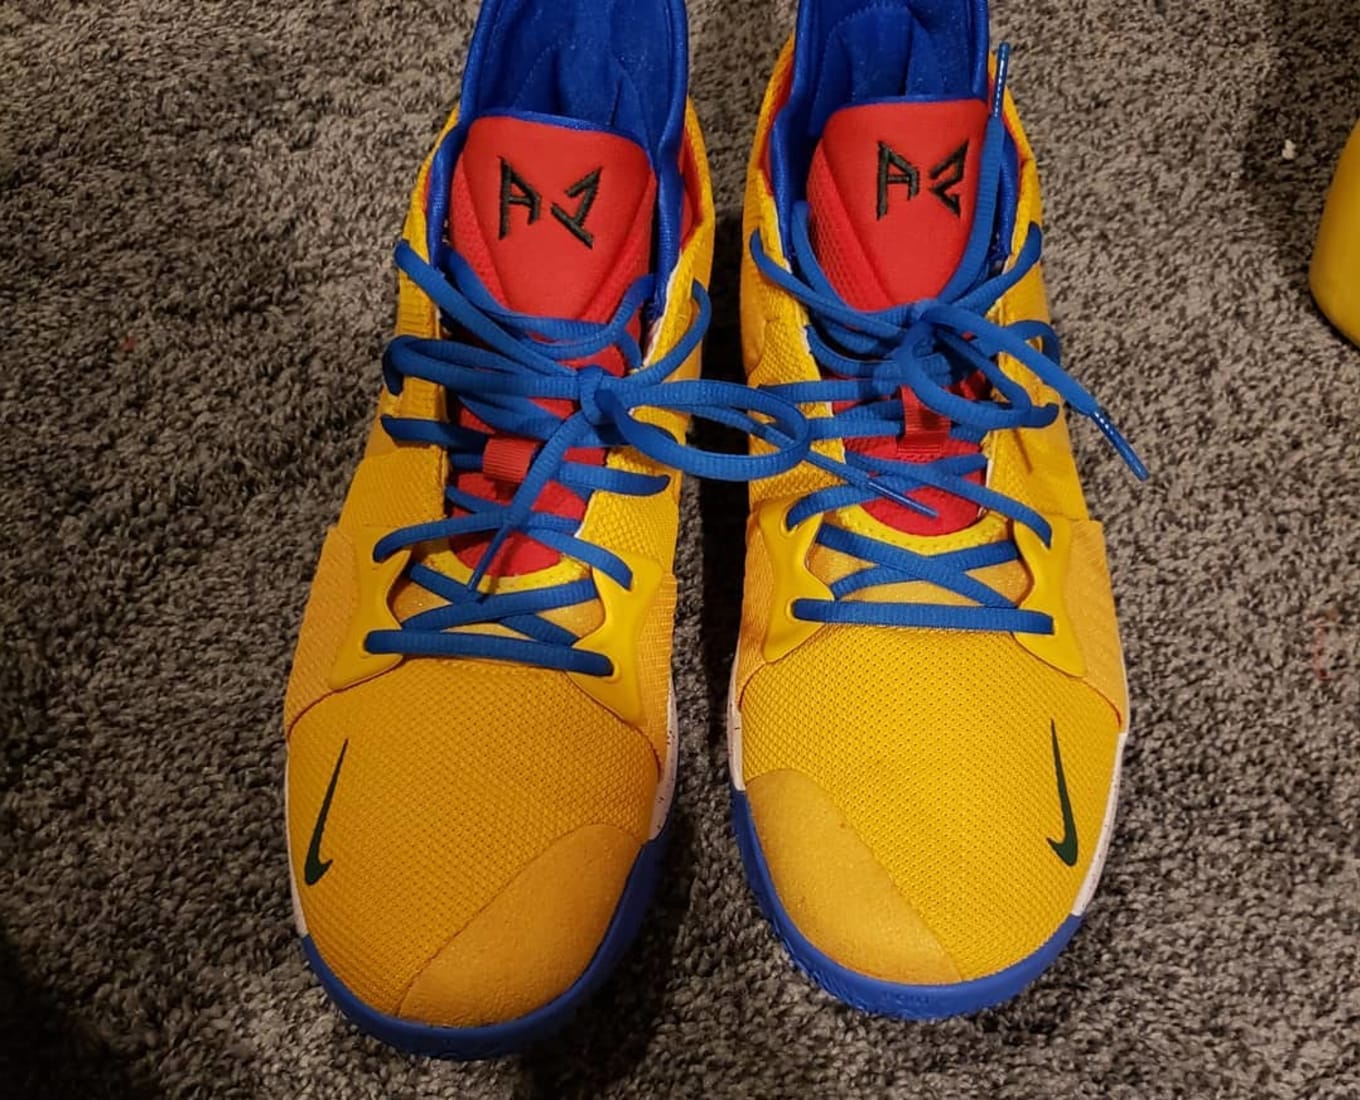 pg 2 id review